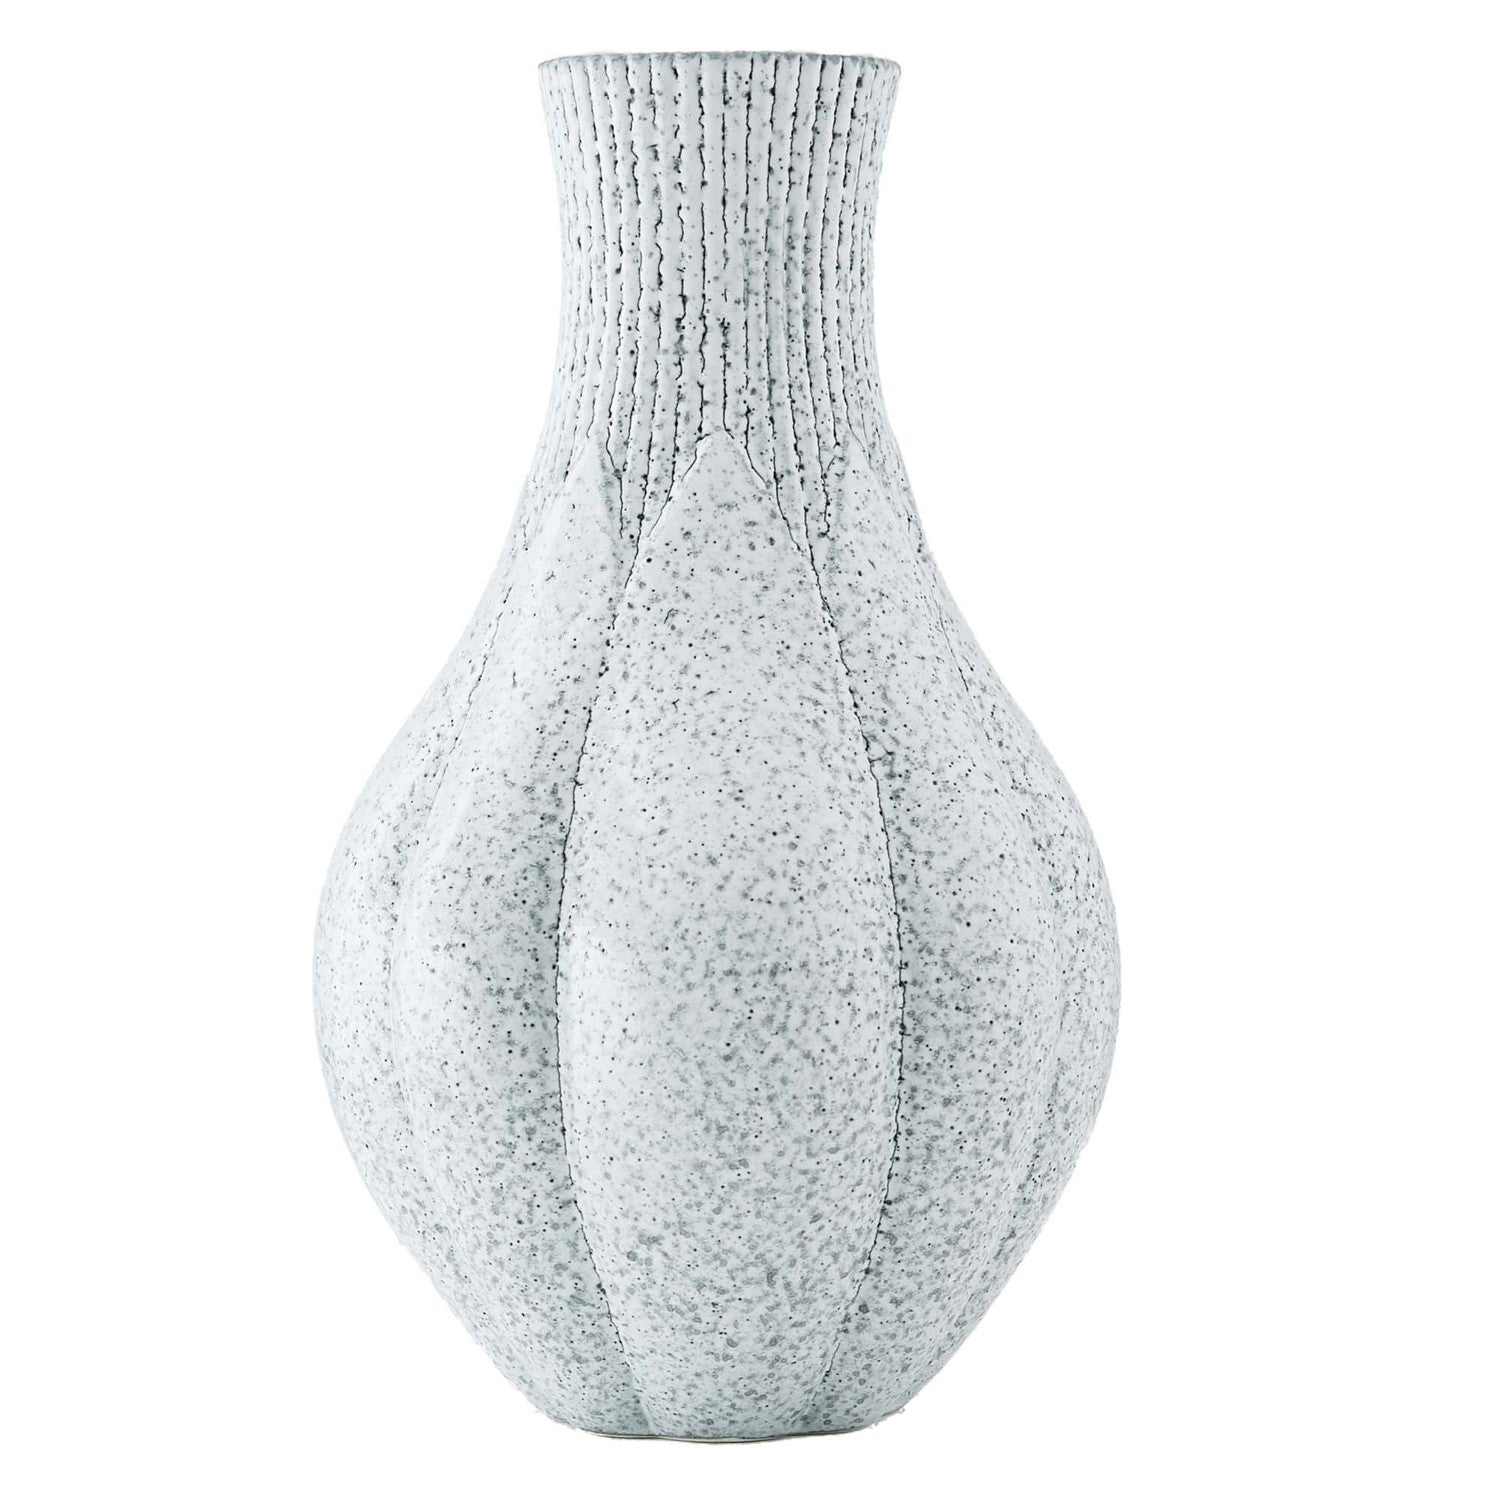 Vase from the Tilling collection in Ice Reactive finish